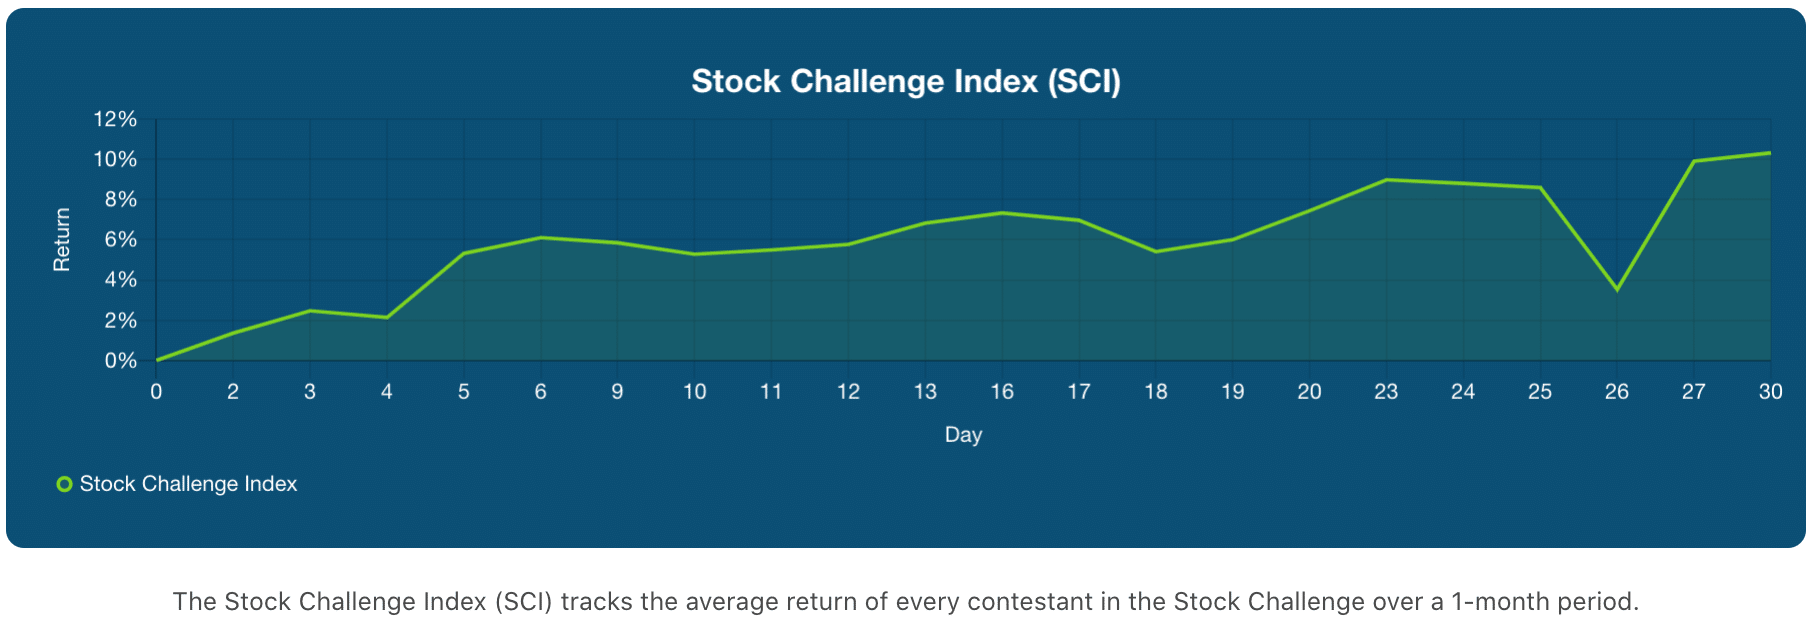 stock challenge index sci as of november 30 2020